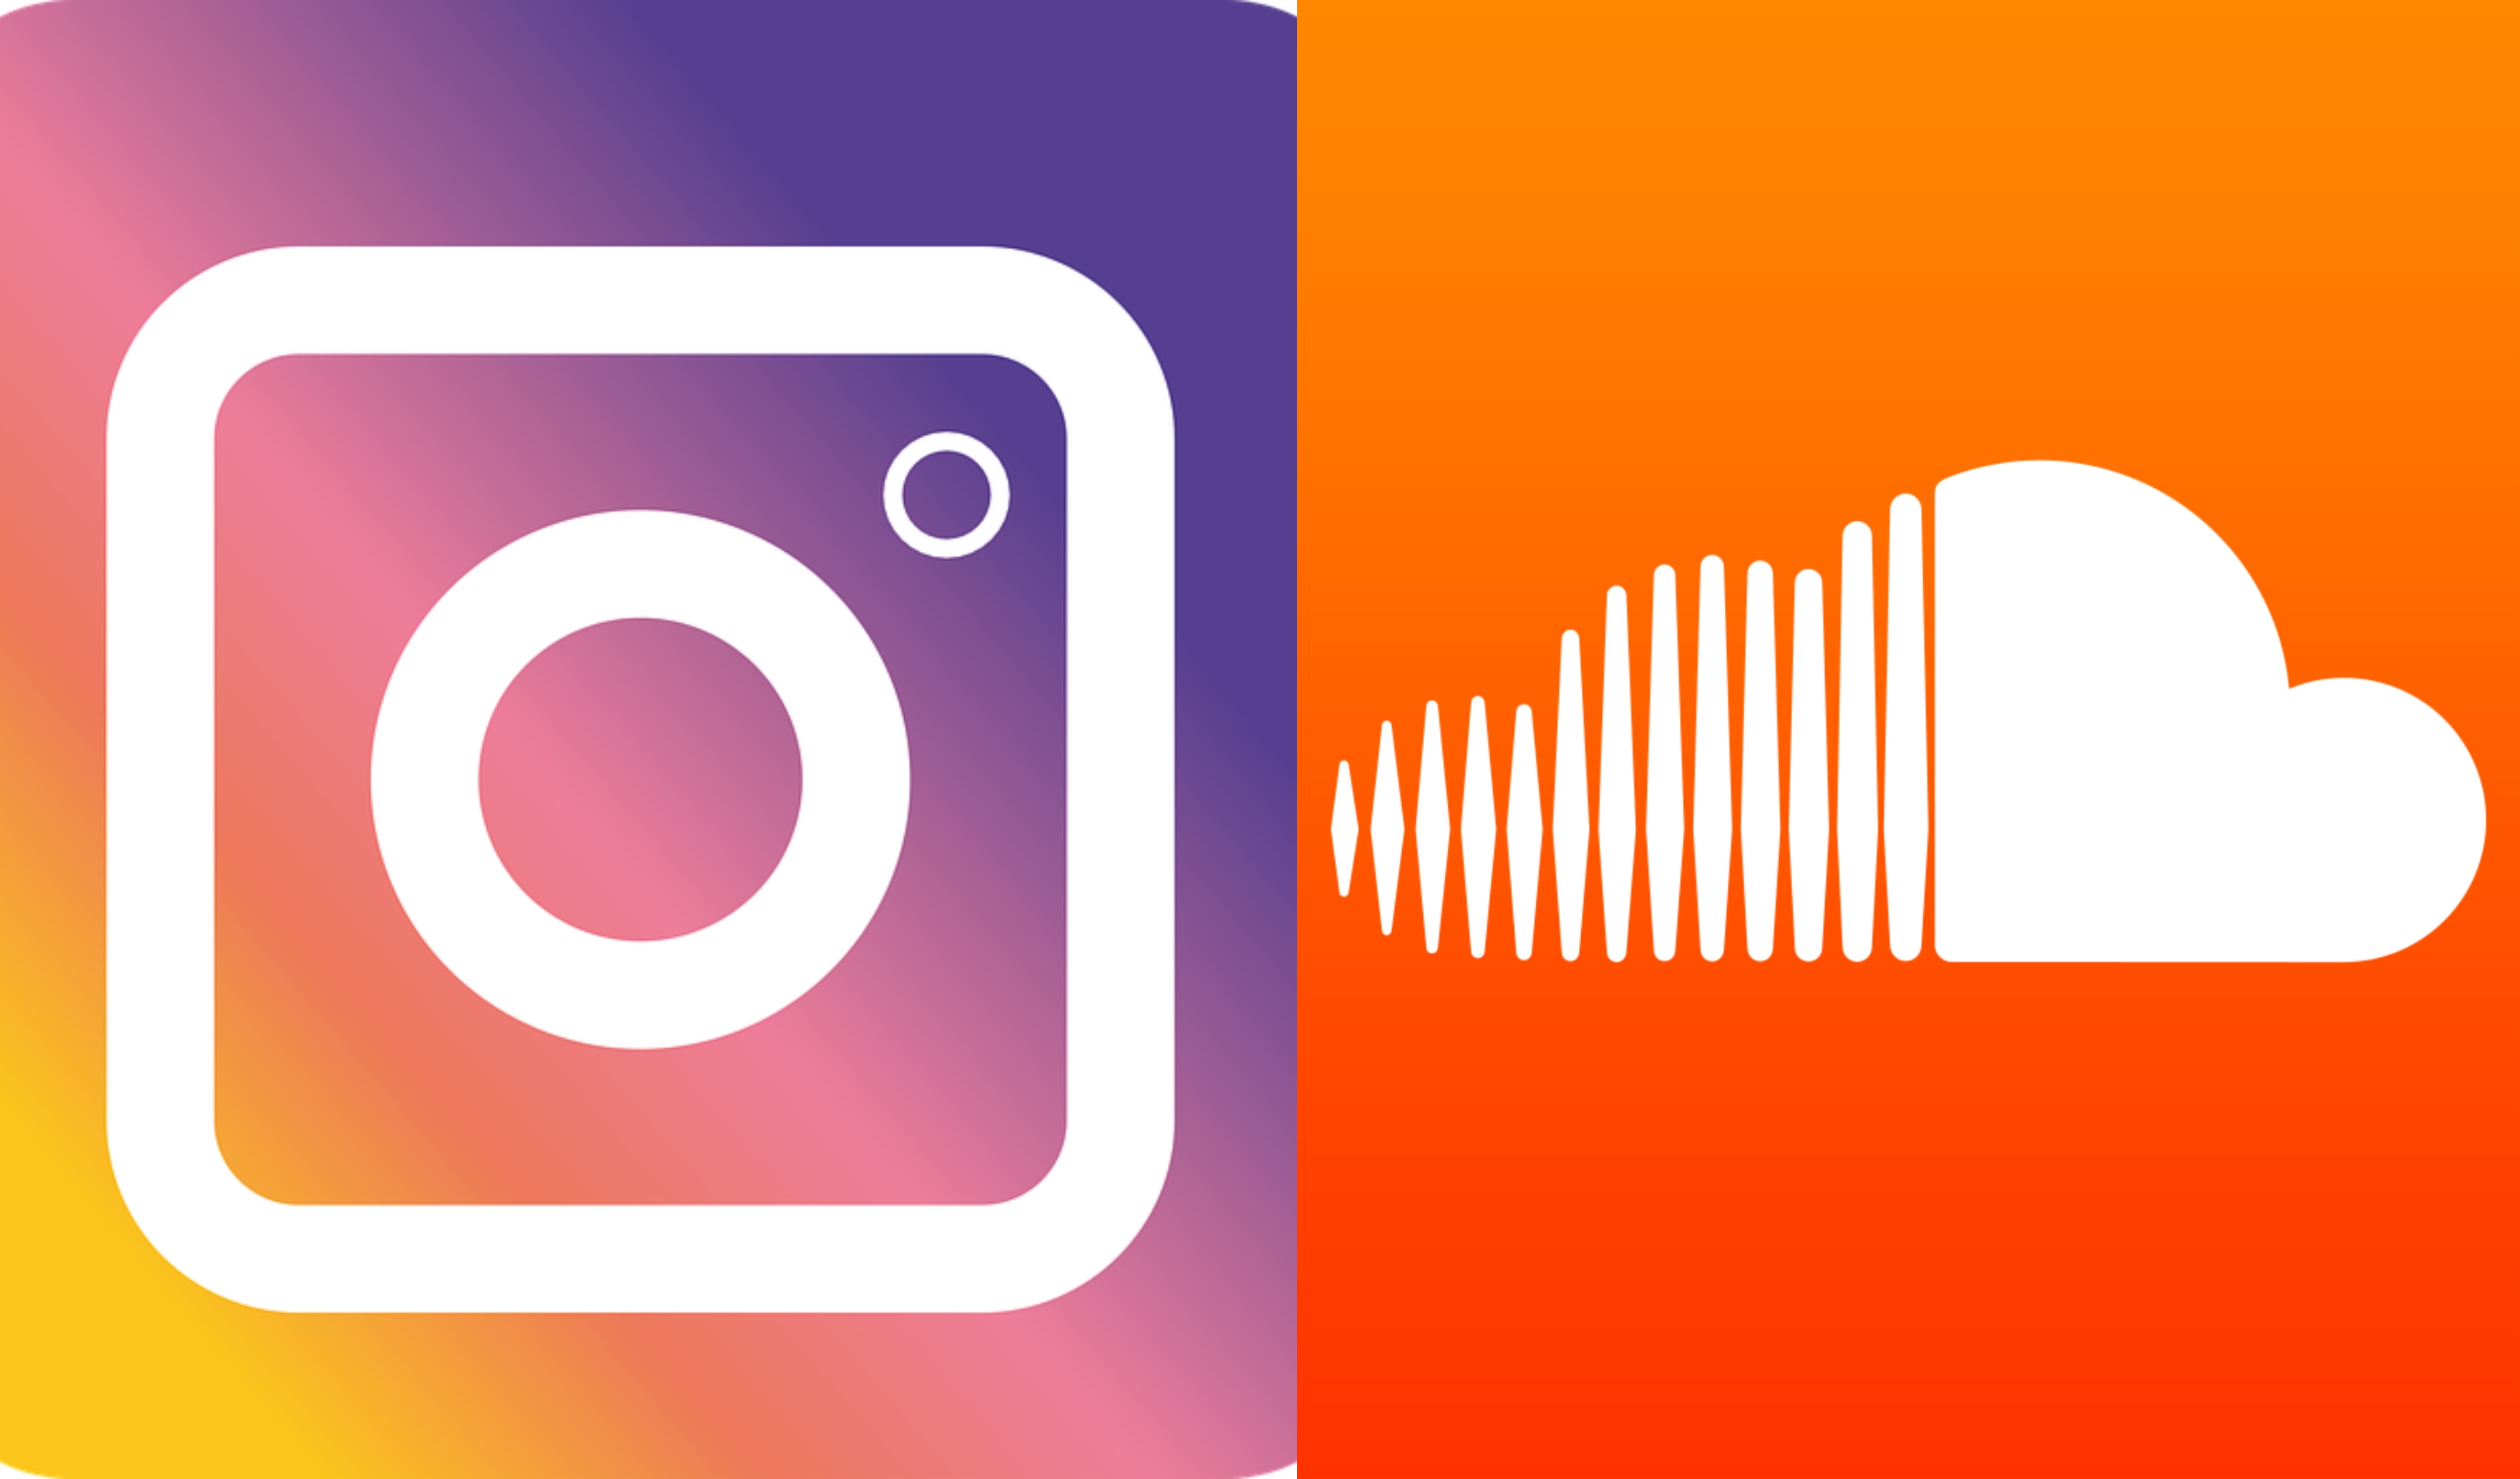 You can now throw your fire SoundCloud on Instagram stories